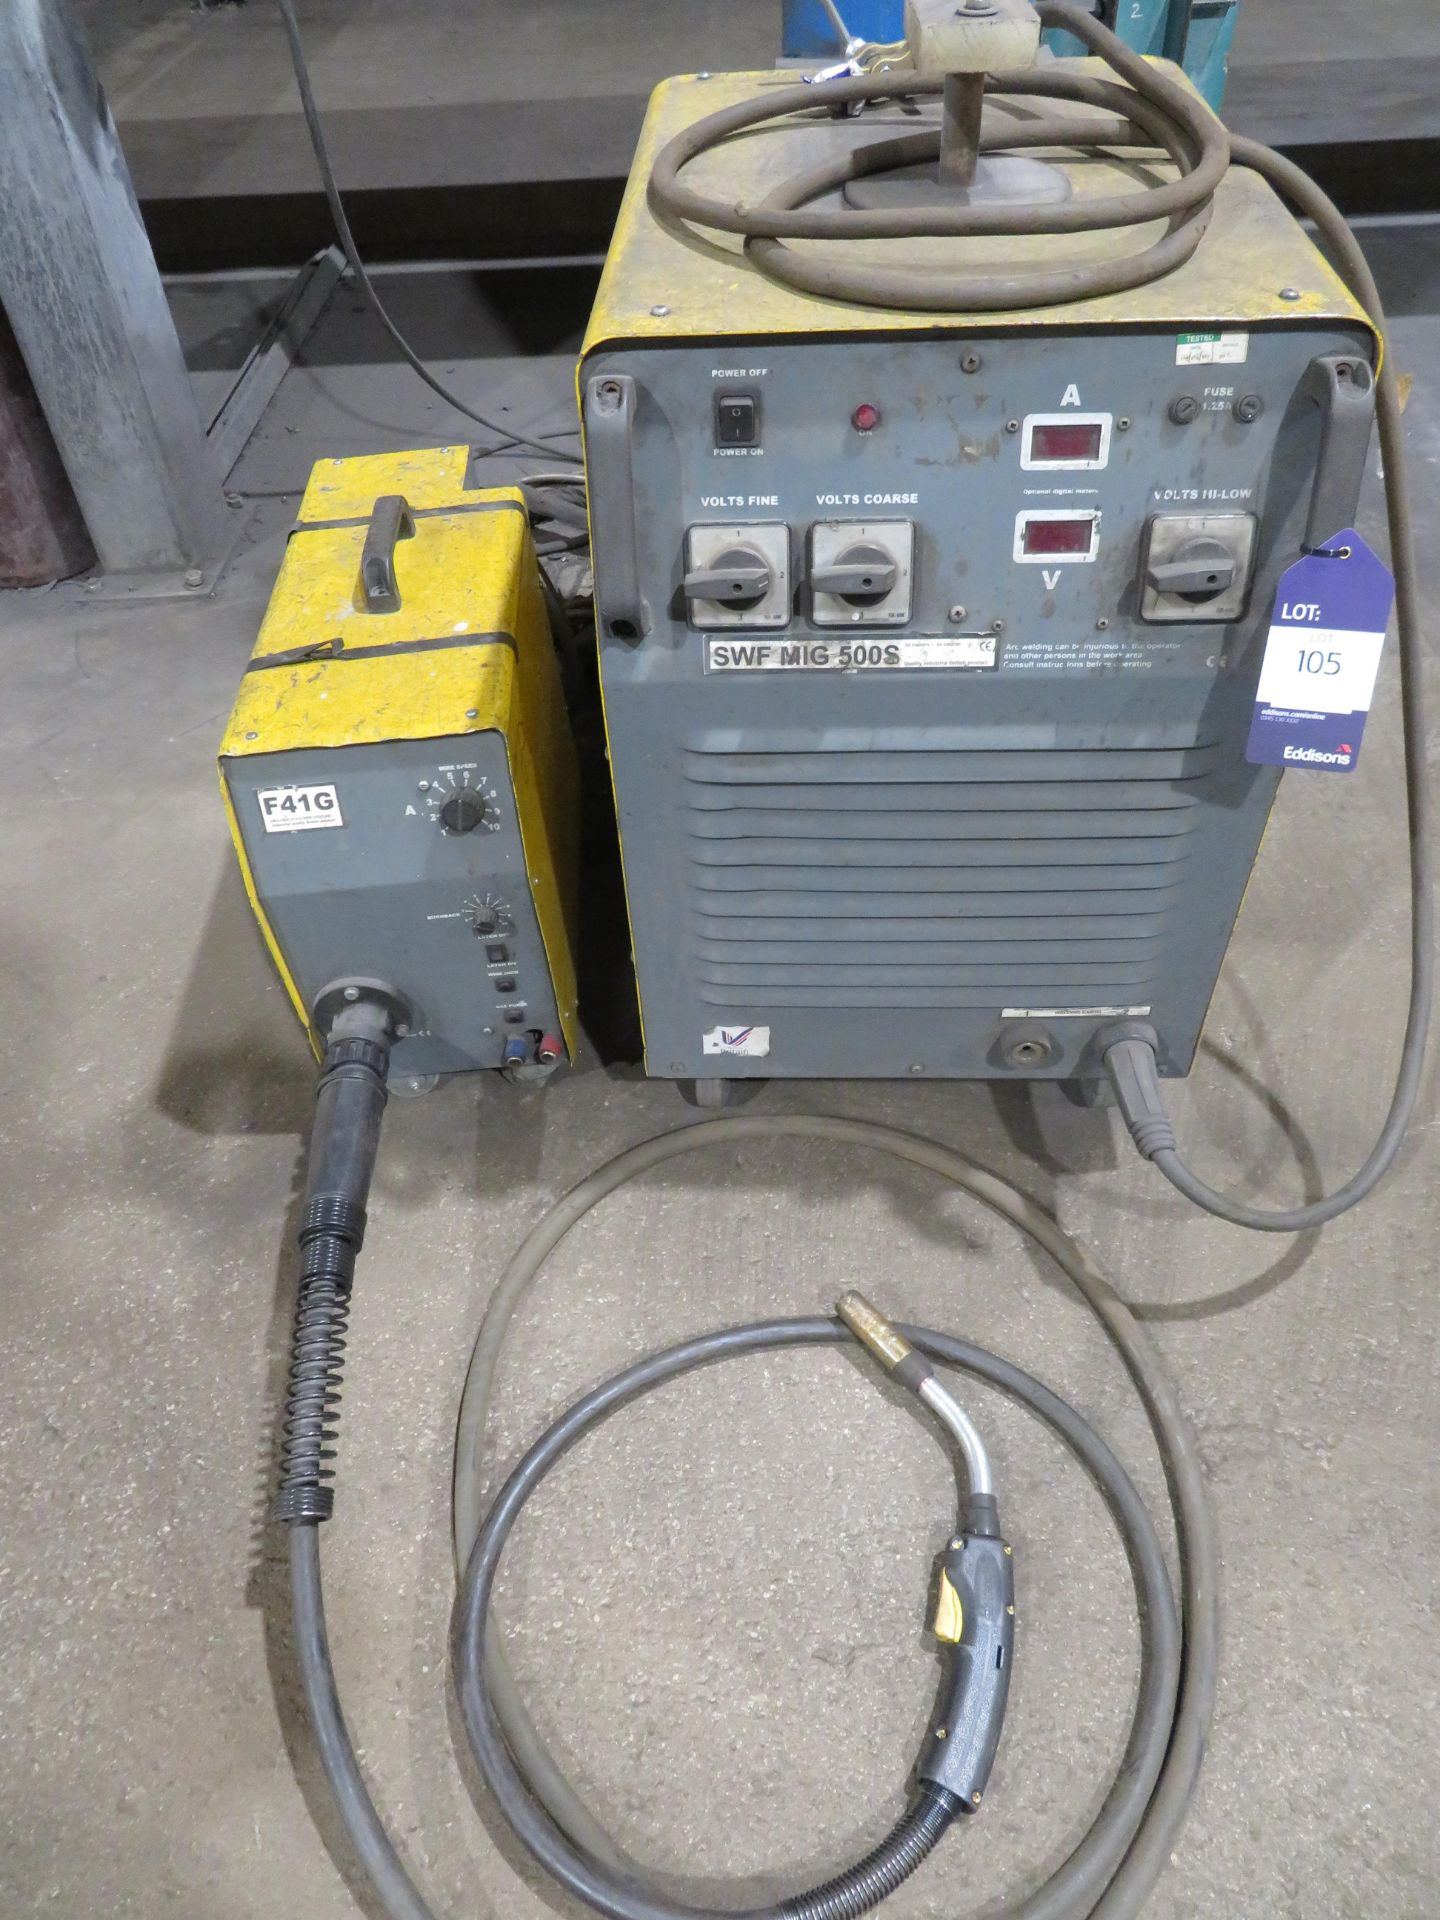 Tecarc SWF Mig 500s welder with F41G wire feed (gas bottle not included)